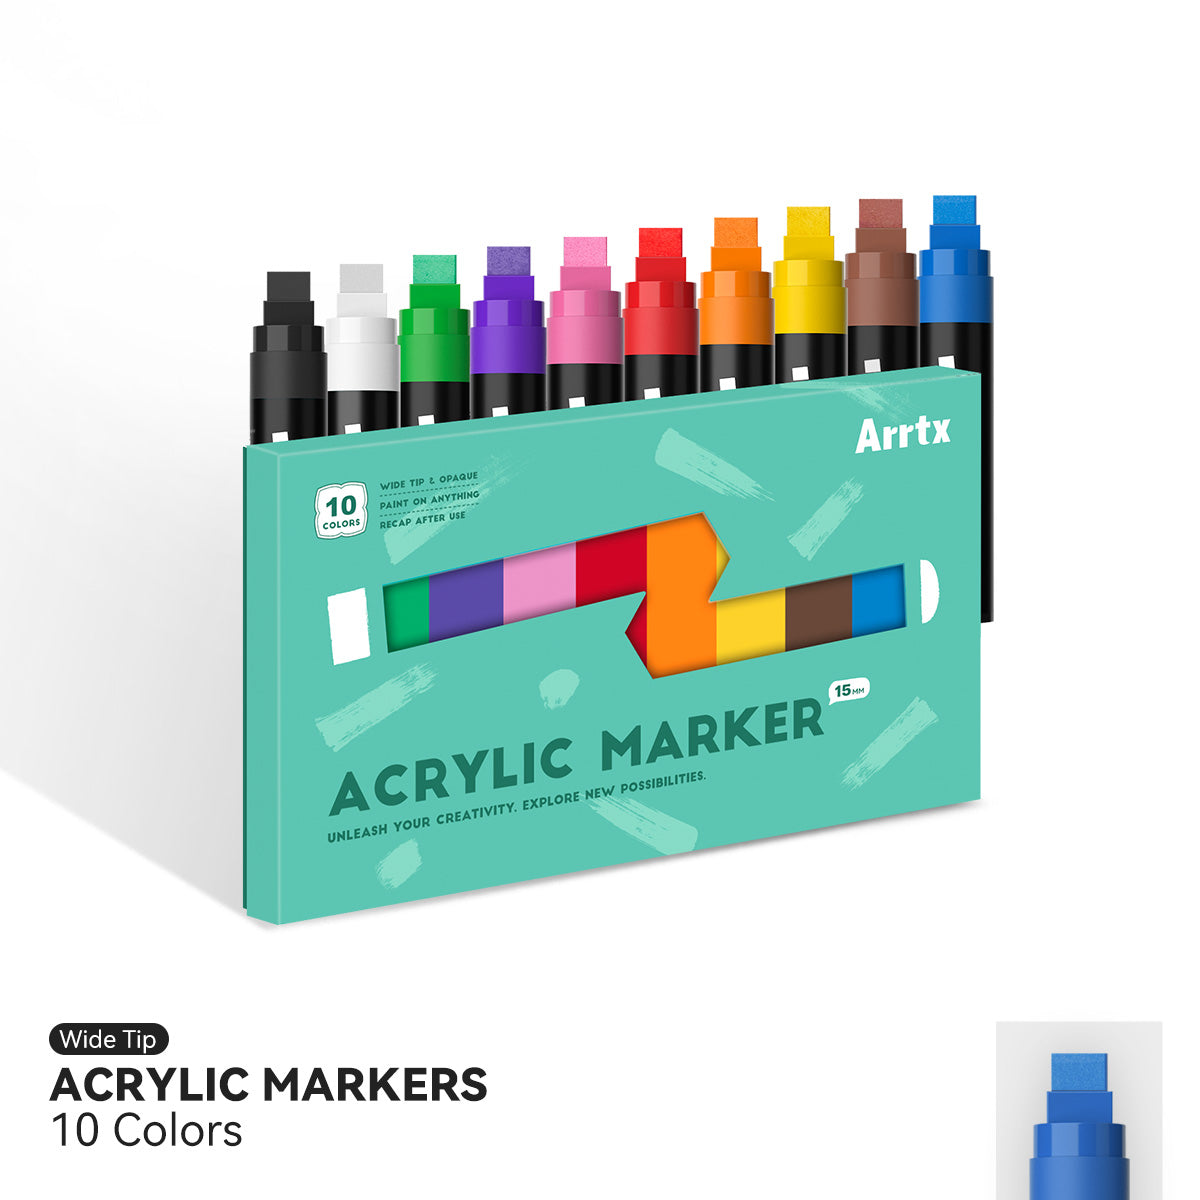 Arrtx on X: What do you think is the biggest difference between the colors  of alcohol markers and acrylic markers?🤔 Artist credit: @ emma.wtj . . .  #arrtxmarkers #arrtx #arrtxart #arrtxacrylicmarkers #acrylicmarkers #